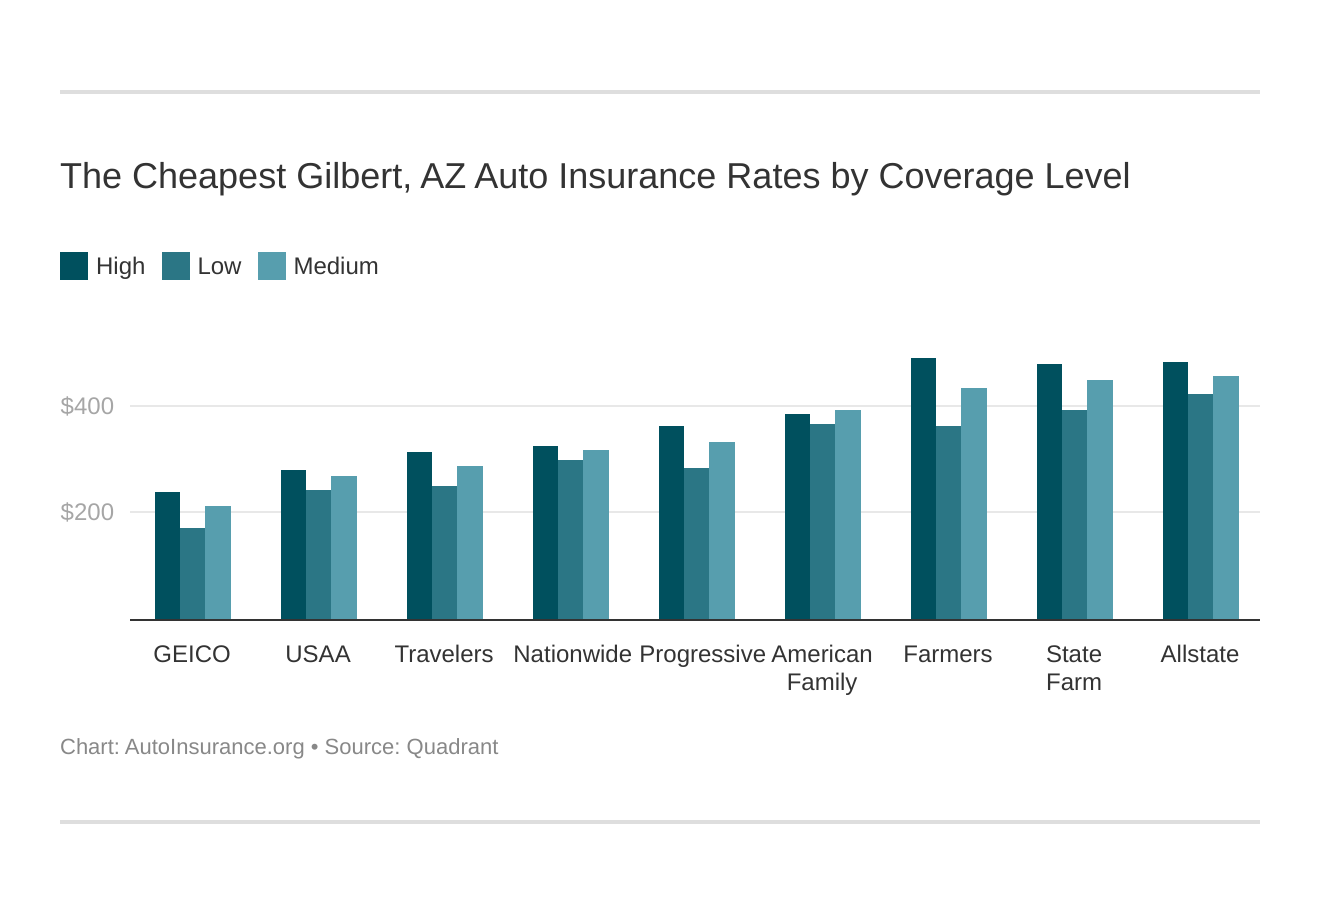 The Cheapest Gilbert, AZ Auto Insurance Rates by Coverage Level